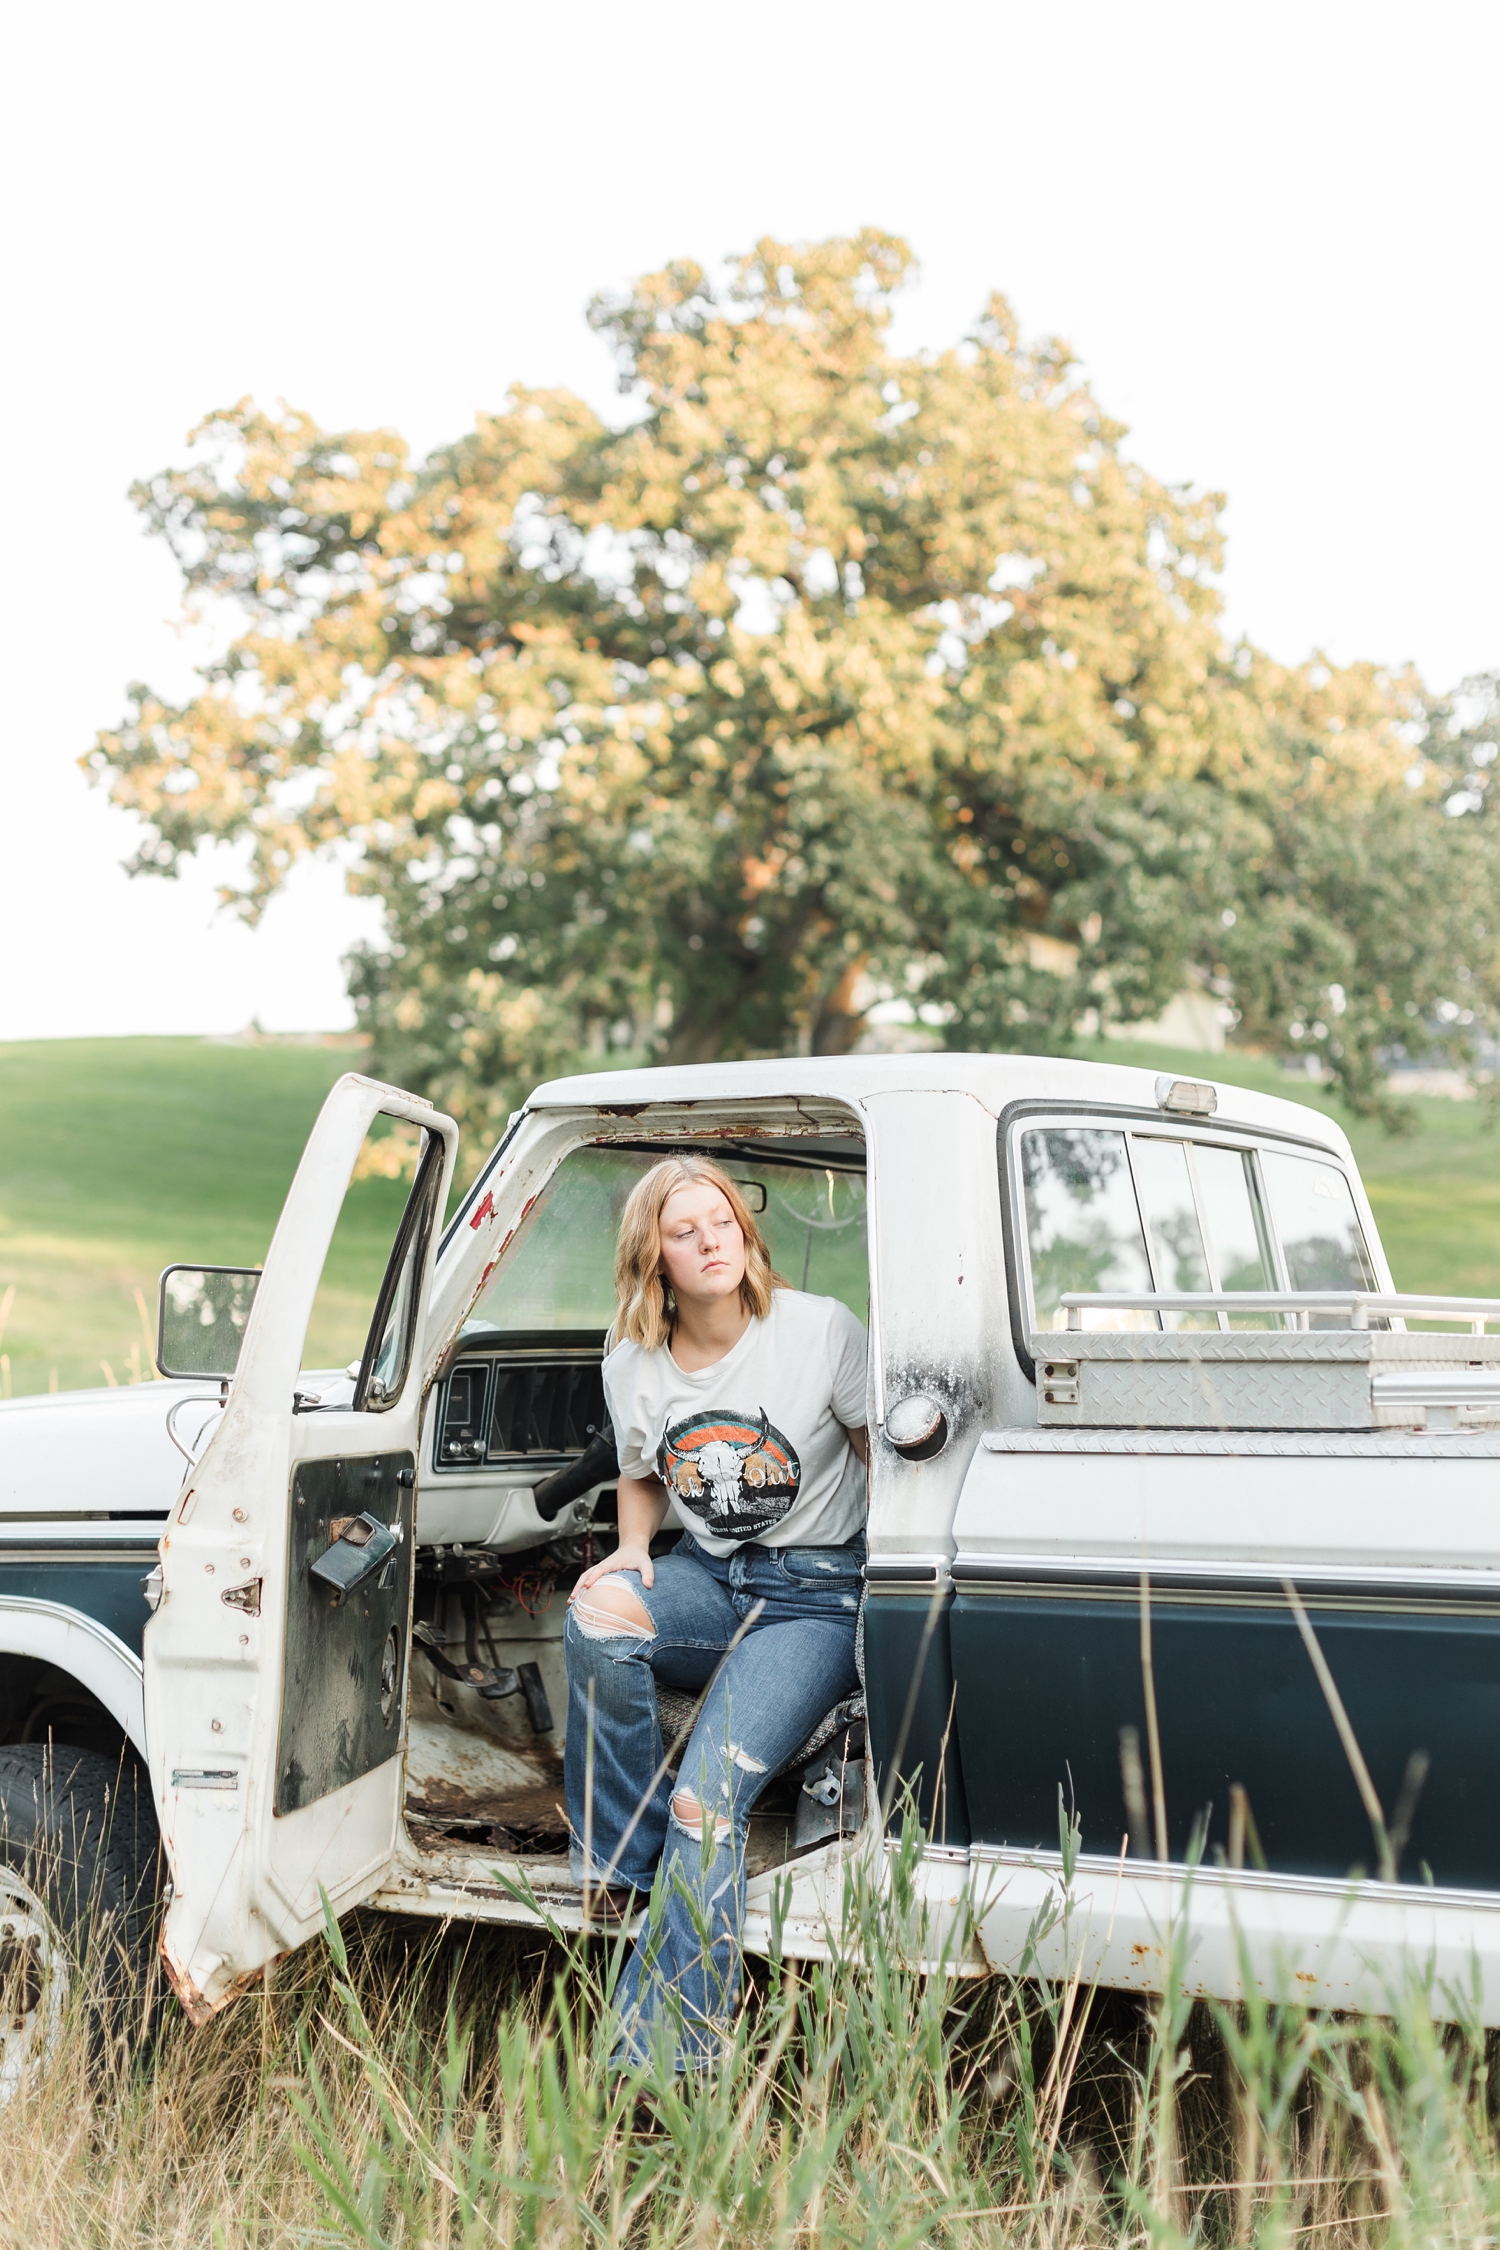 Kenzie sits in the driver's seat of a 70's Ford Highboy truck in the middle of a grassy field while looking to the back of the truck | CB Studio